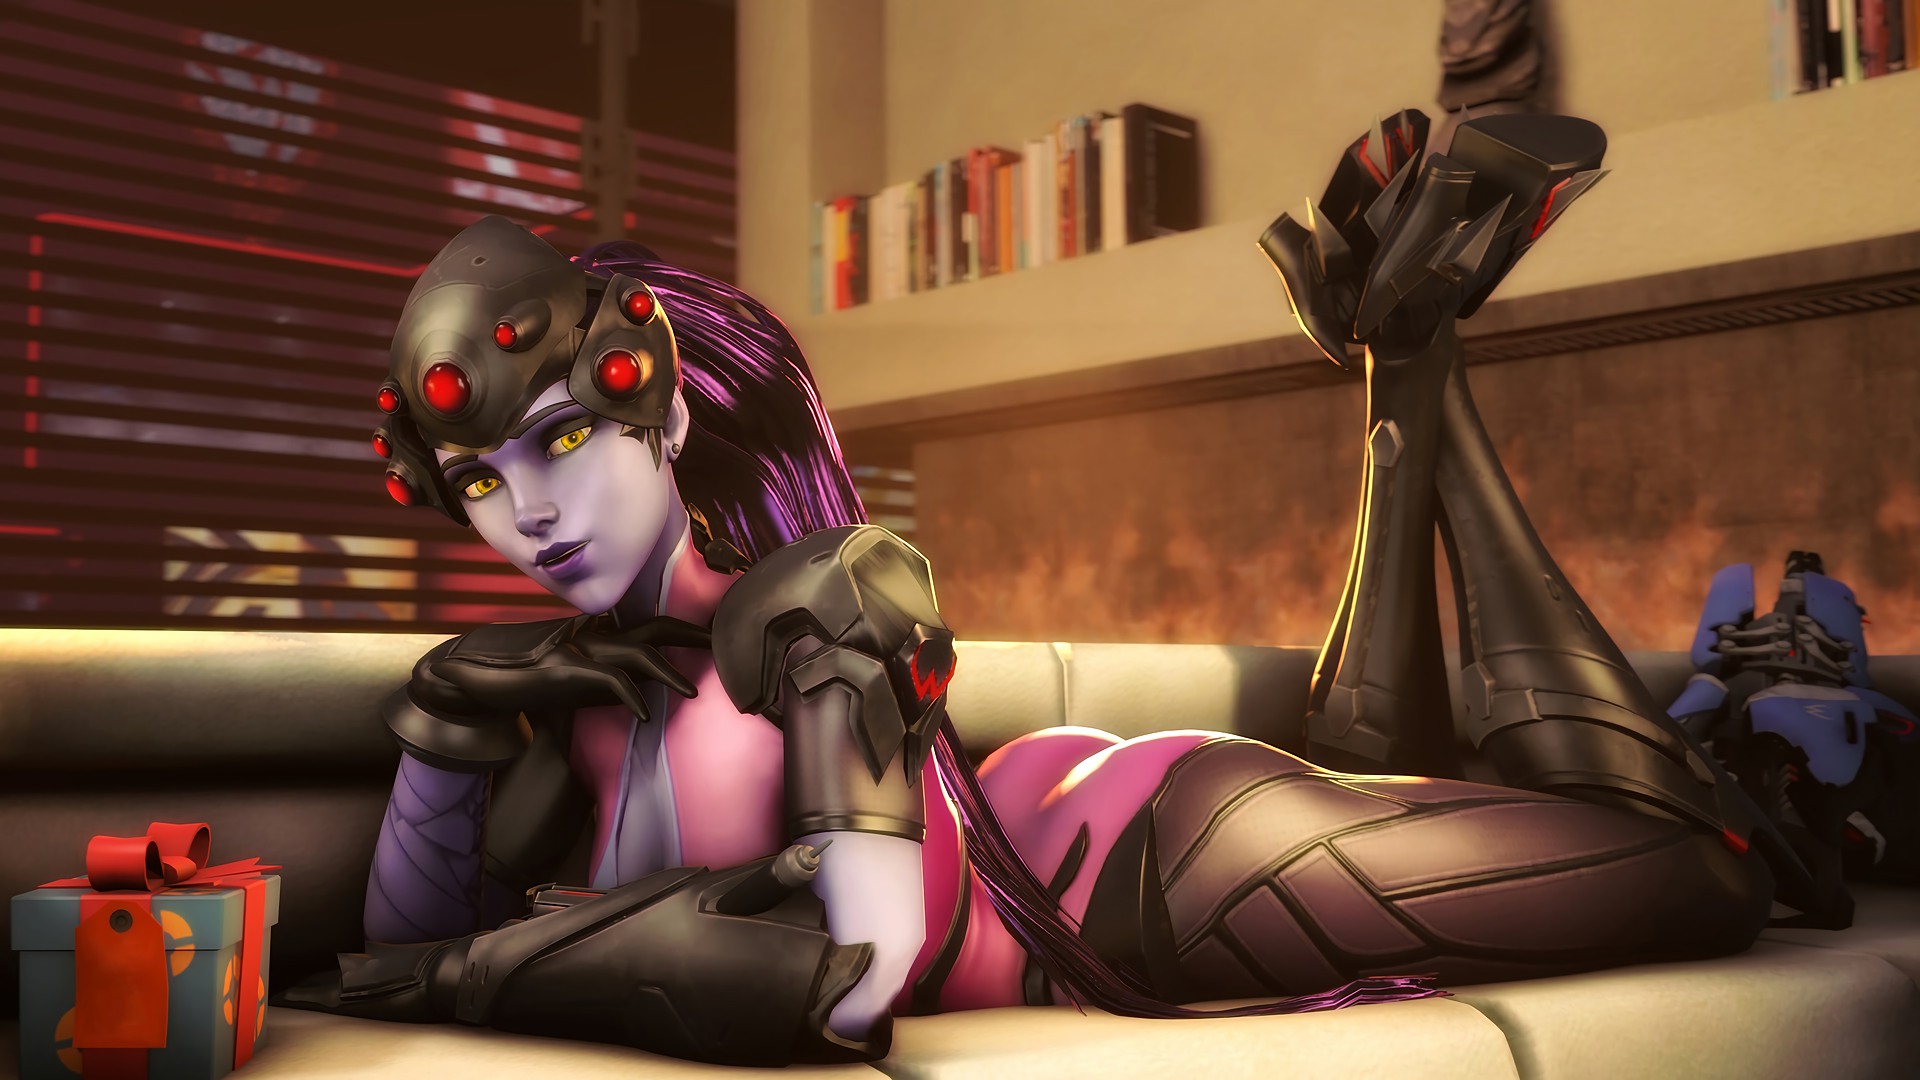 General 1920x1080 Overwatch Anniversary Widowmaker (Overwatch) ass yellow eyes video game art legs up presents PC gaming lying on front